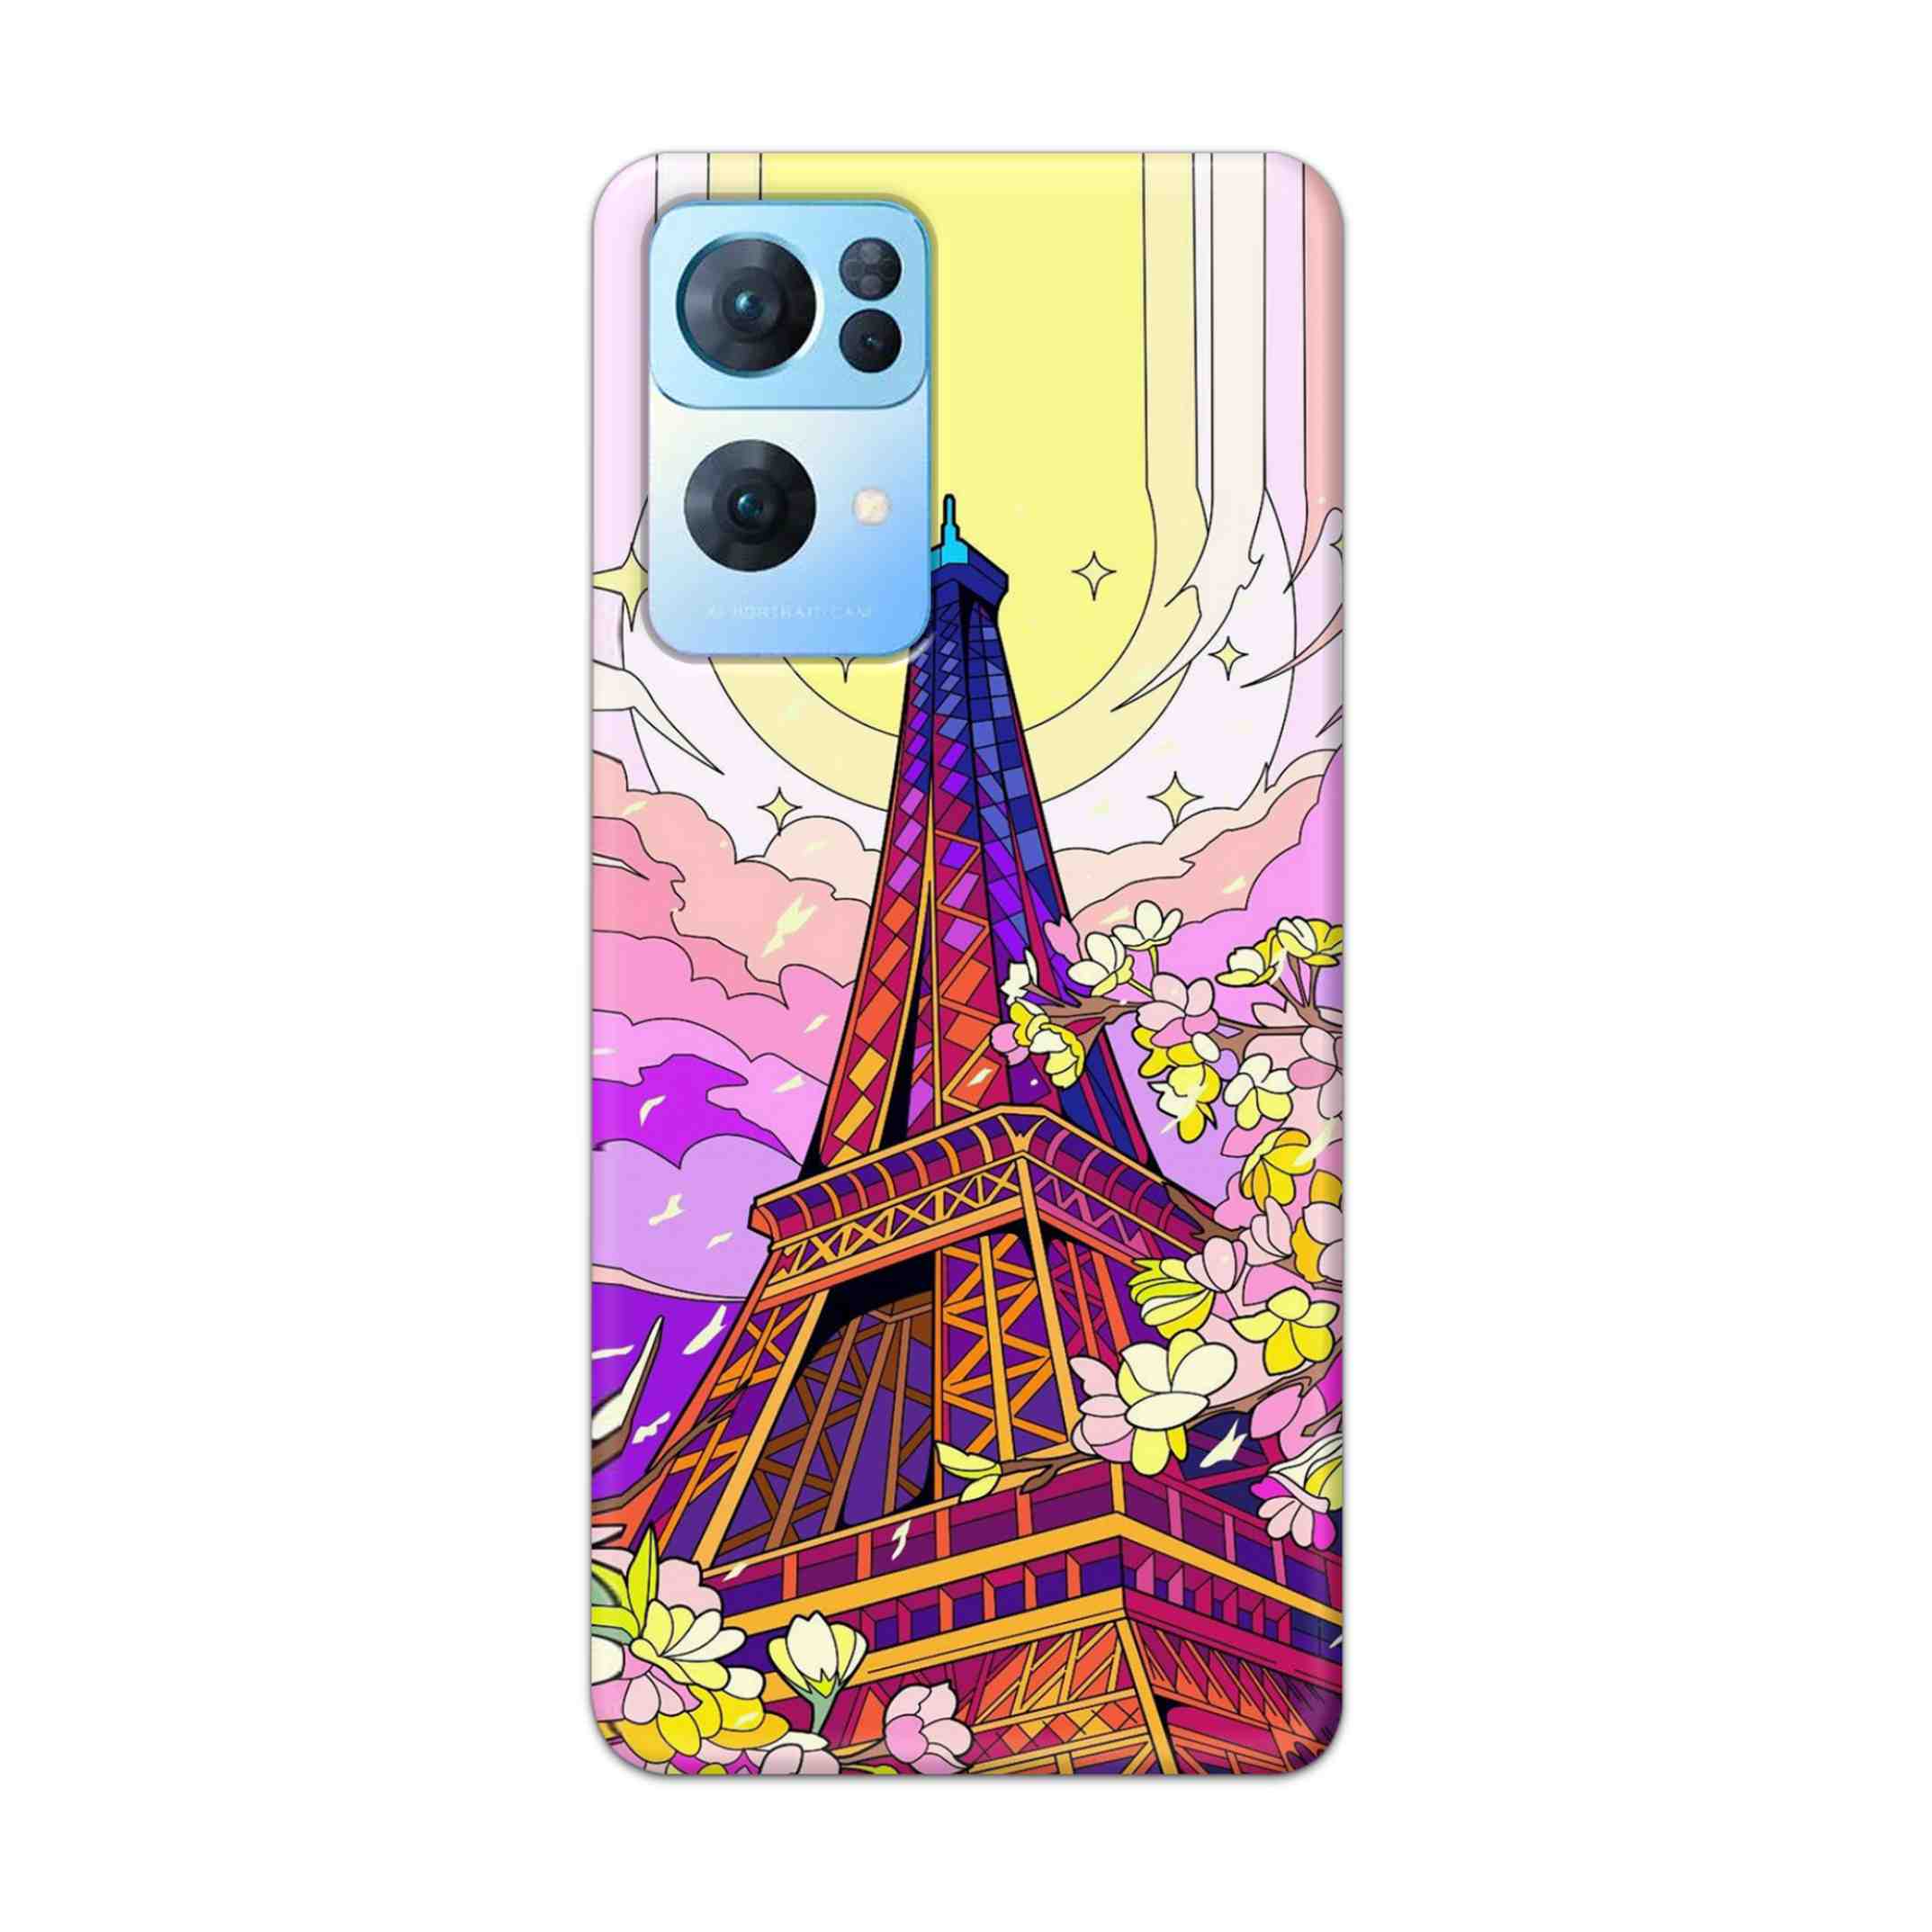 Buy Eiffel Tower Hard Back Mobile Phone Case Cover For Oppo Reno 7 Pro Online